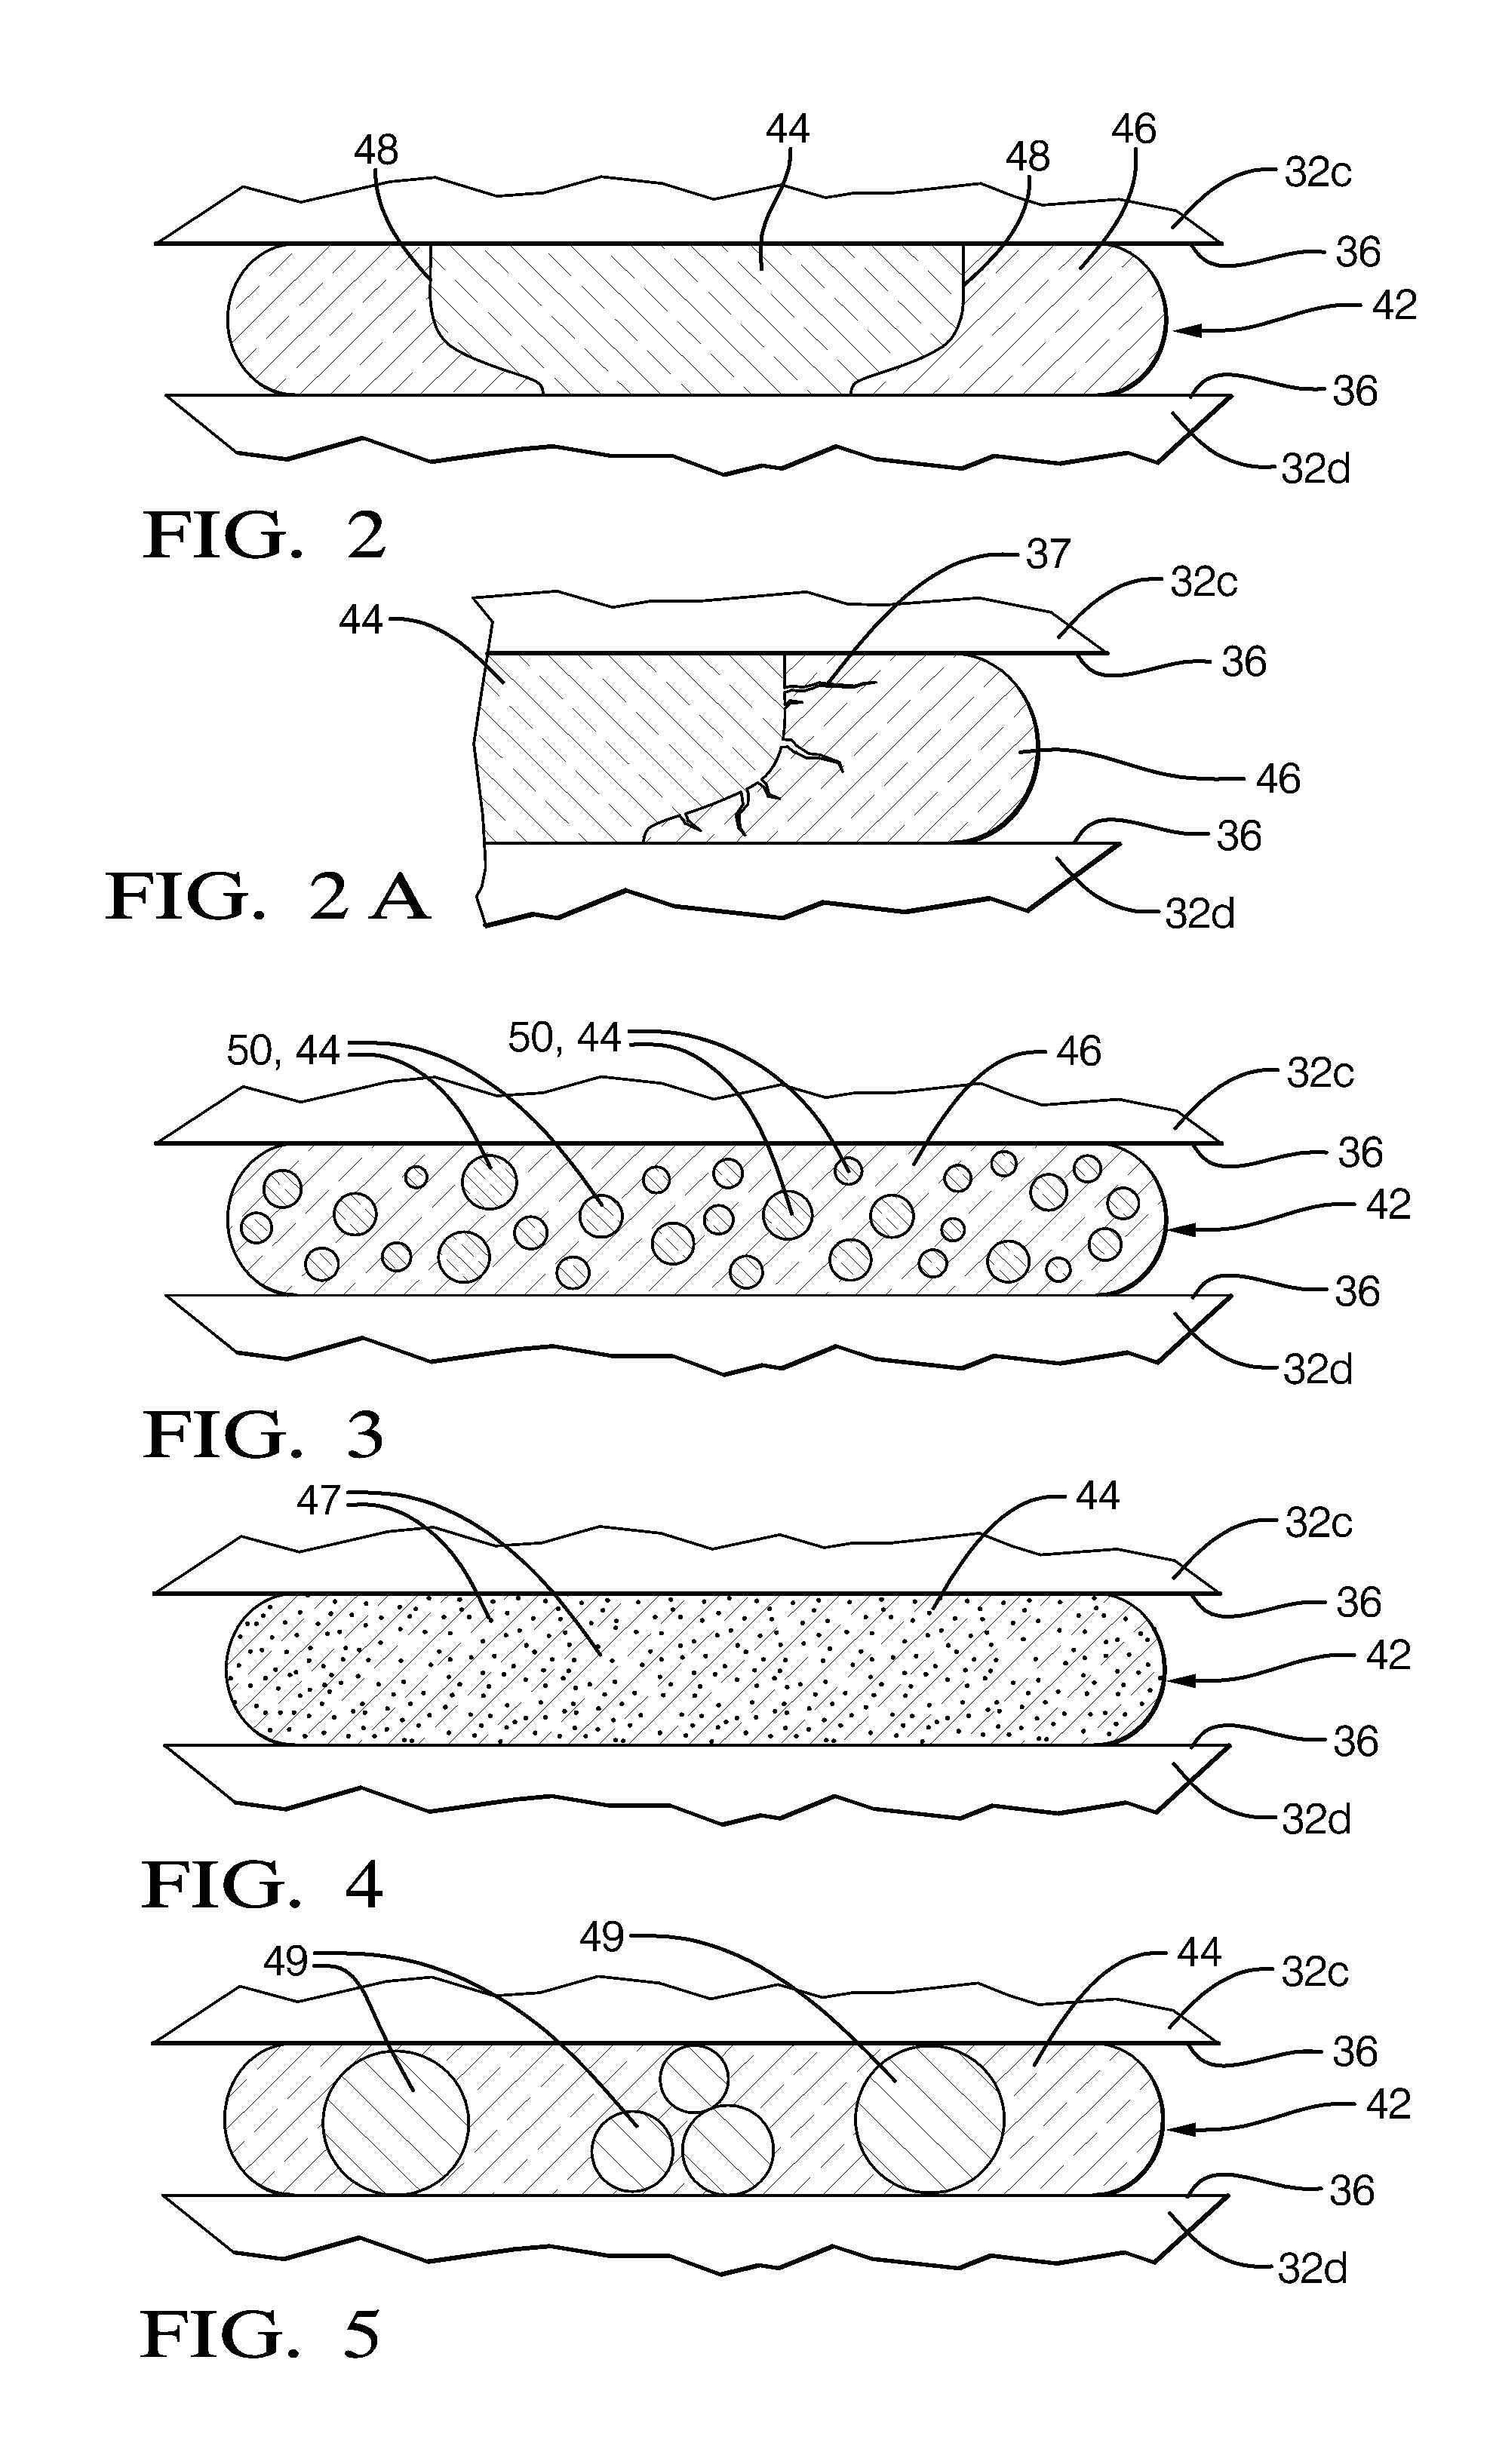 Solid oxide fuel cell having a glass composite seal